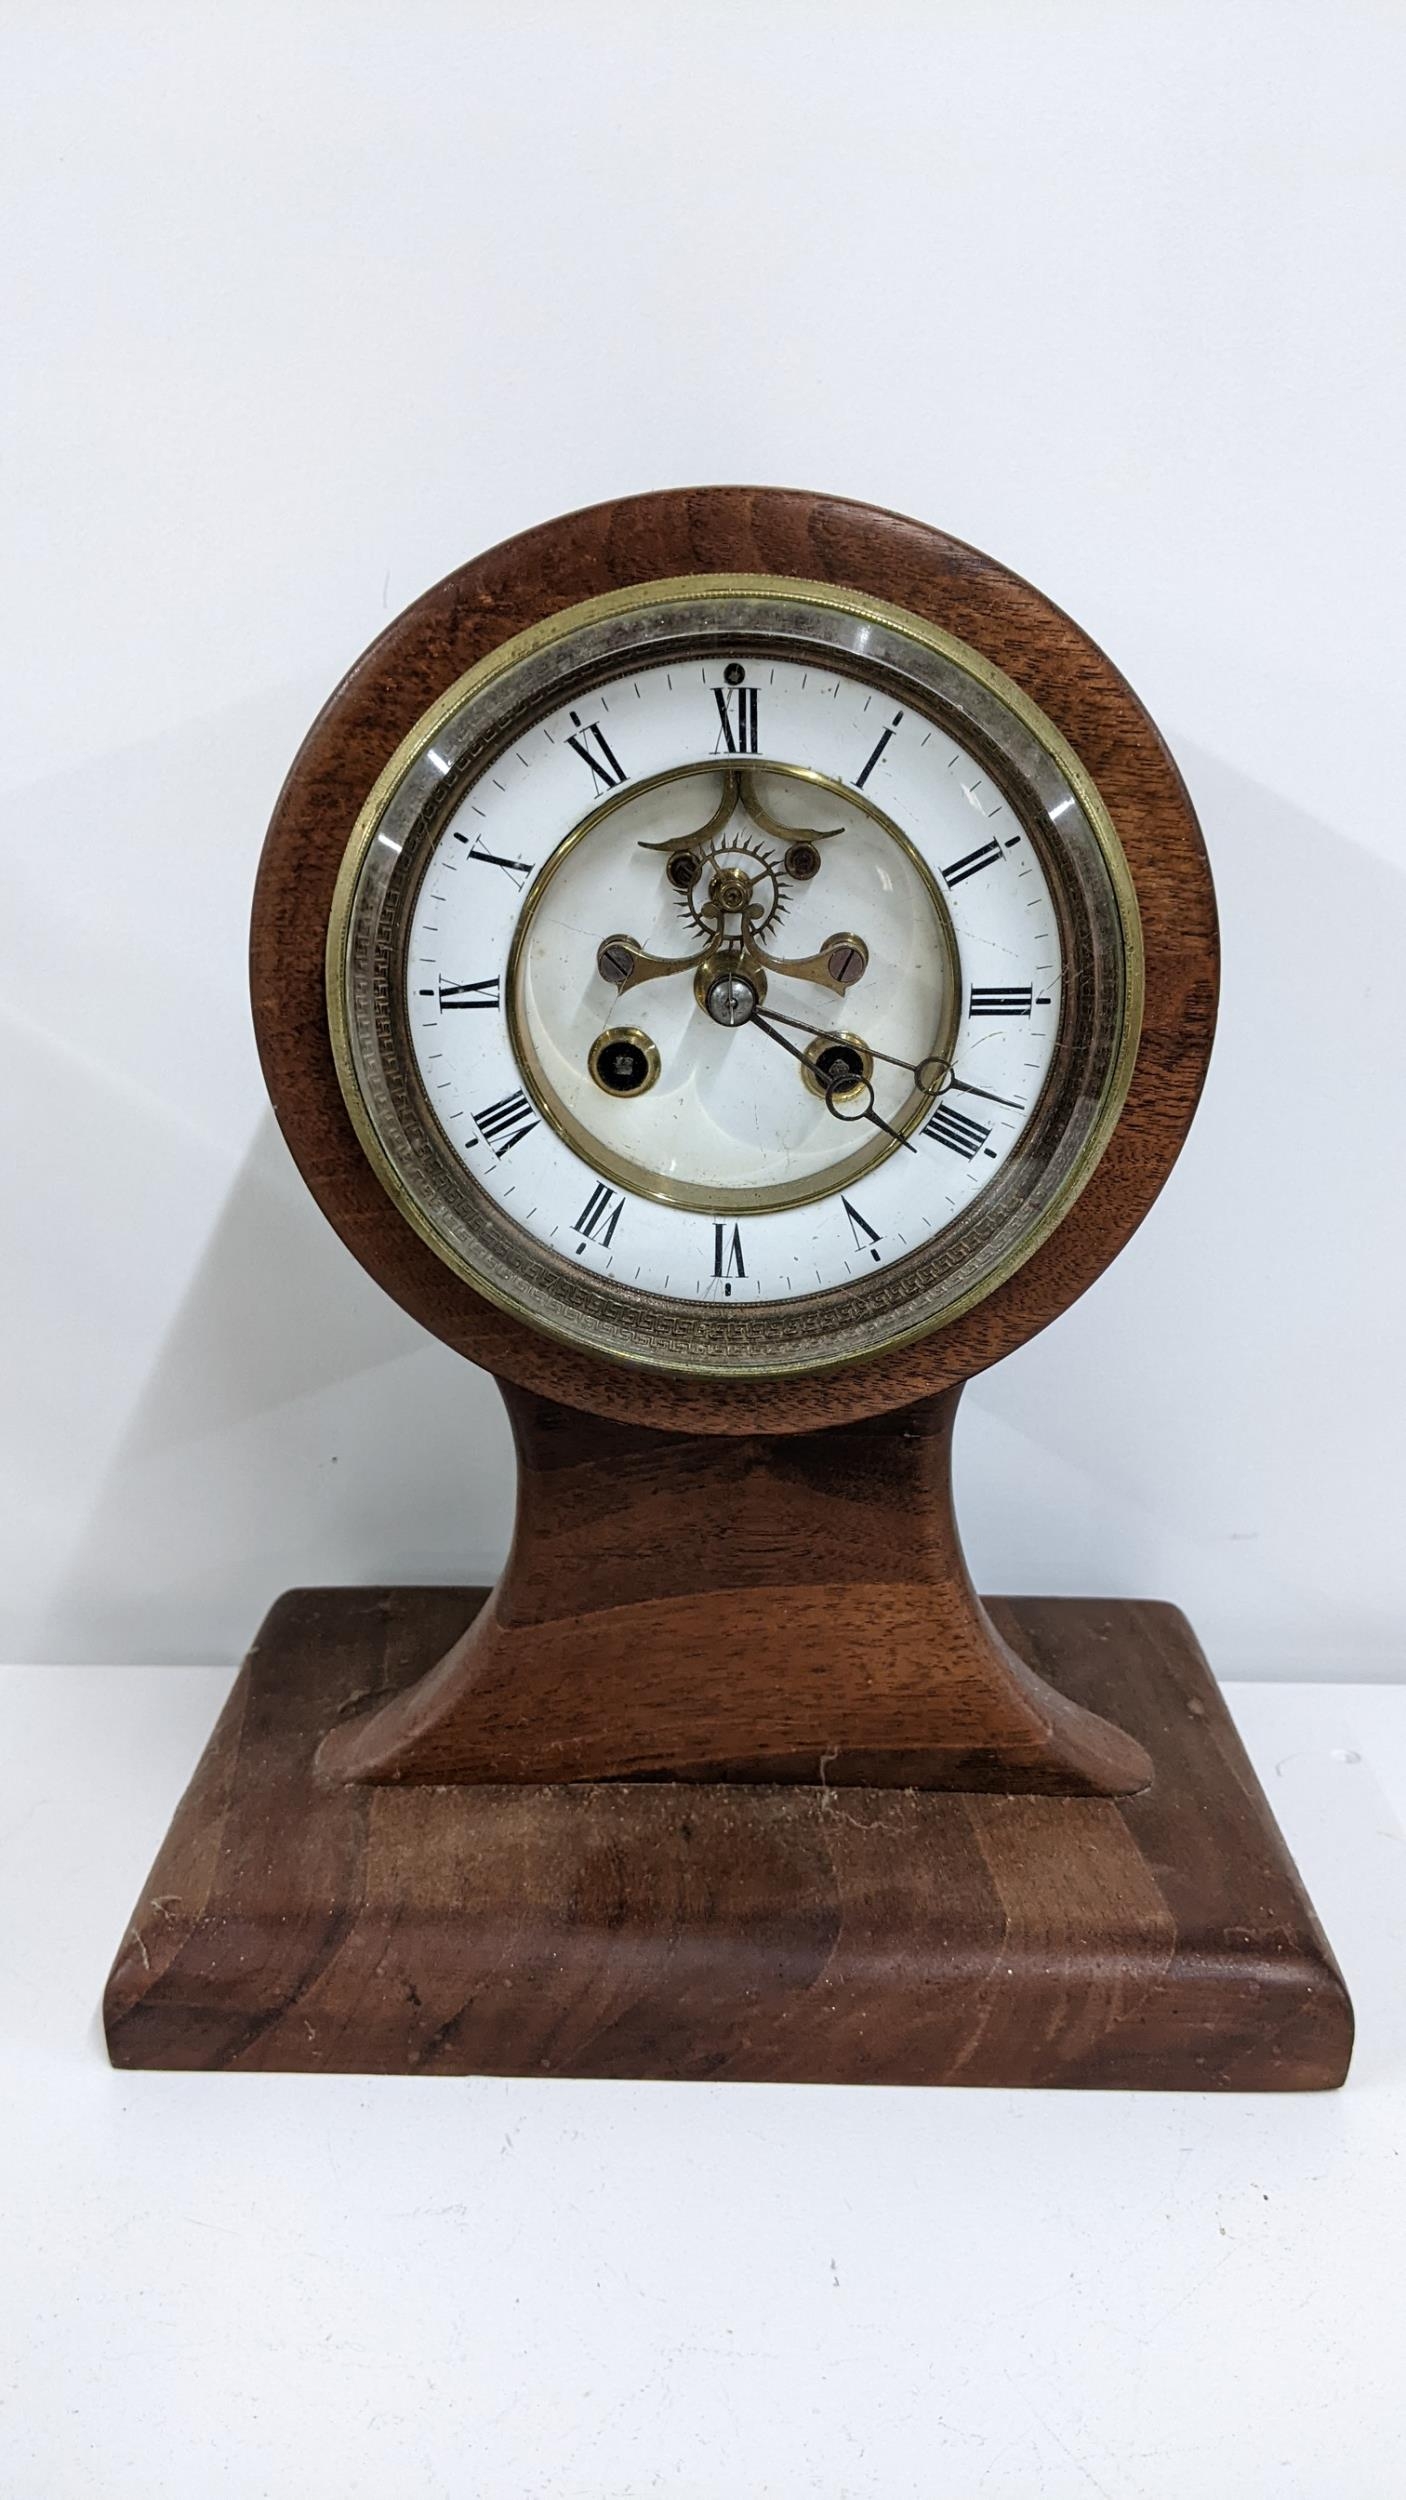 An early 20th century propellor mantel clock having a visible Brocot escapement with Breguet style